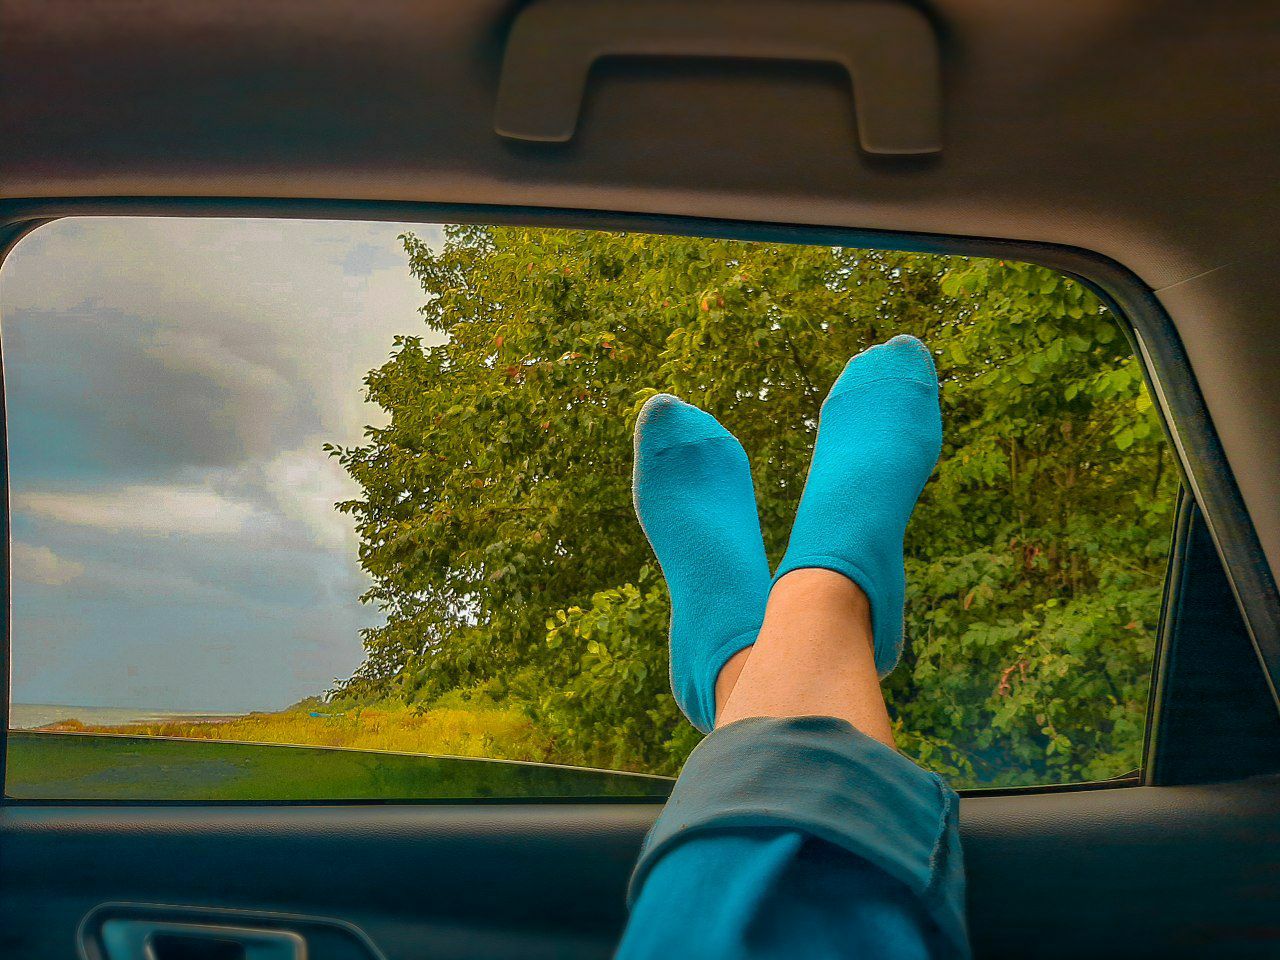 a person's foot in a car